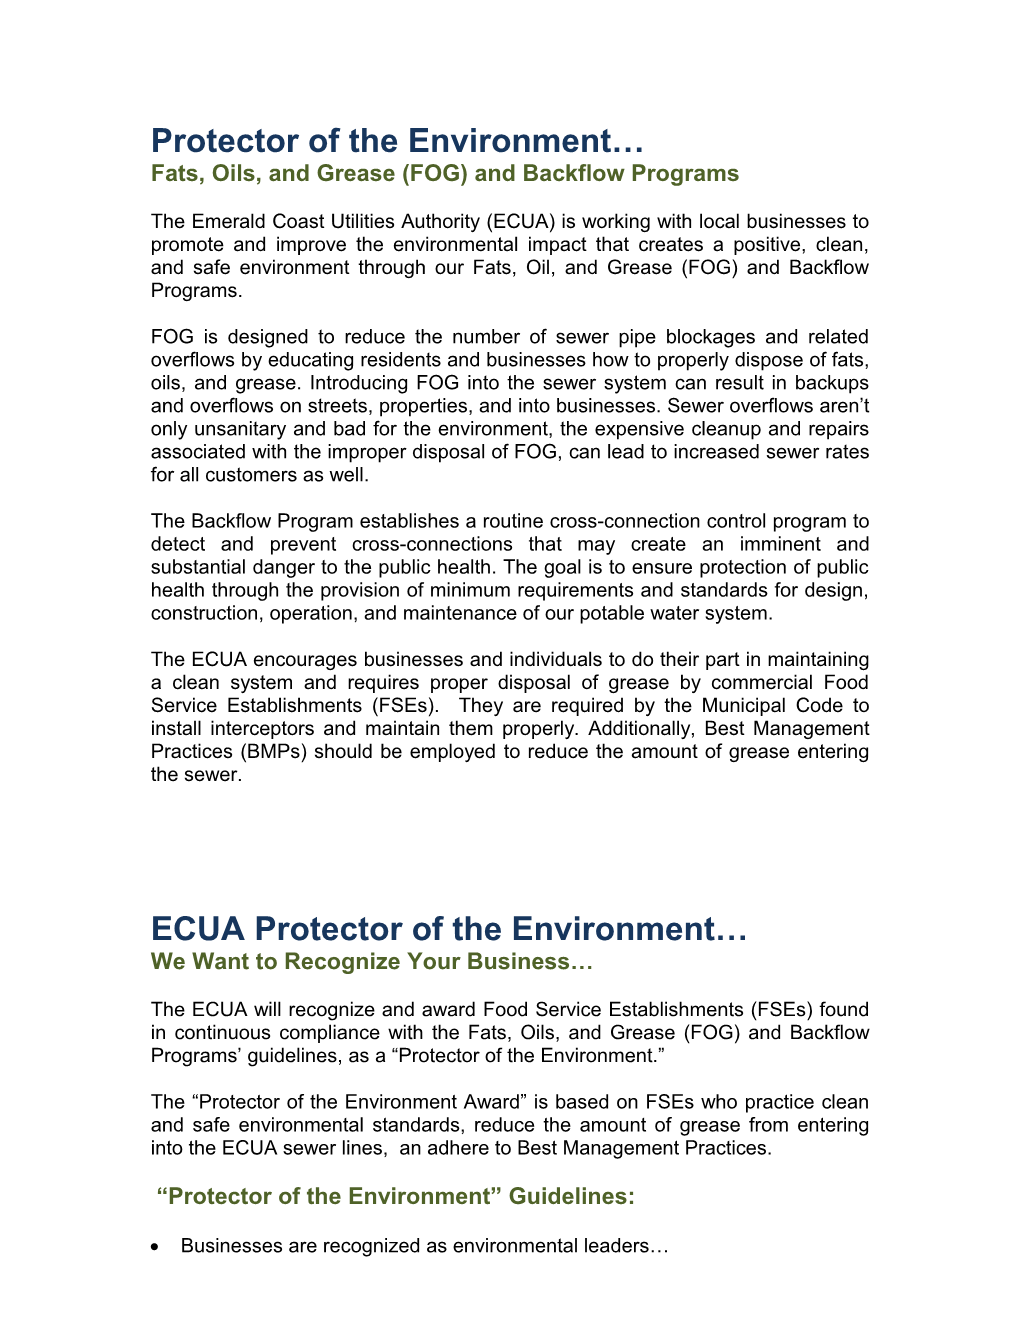 ECUA Protector of the Environment Fats, Oils, and Grease (FOG) and Backflow Programs